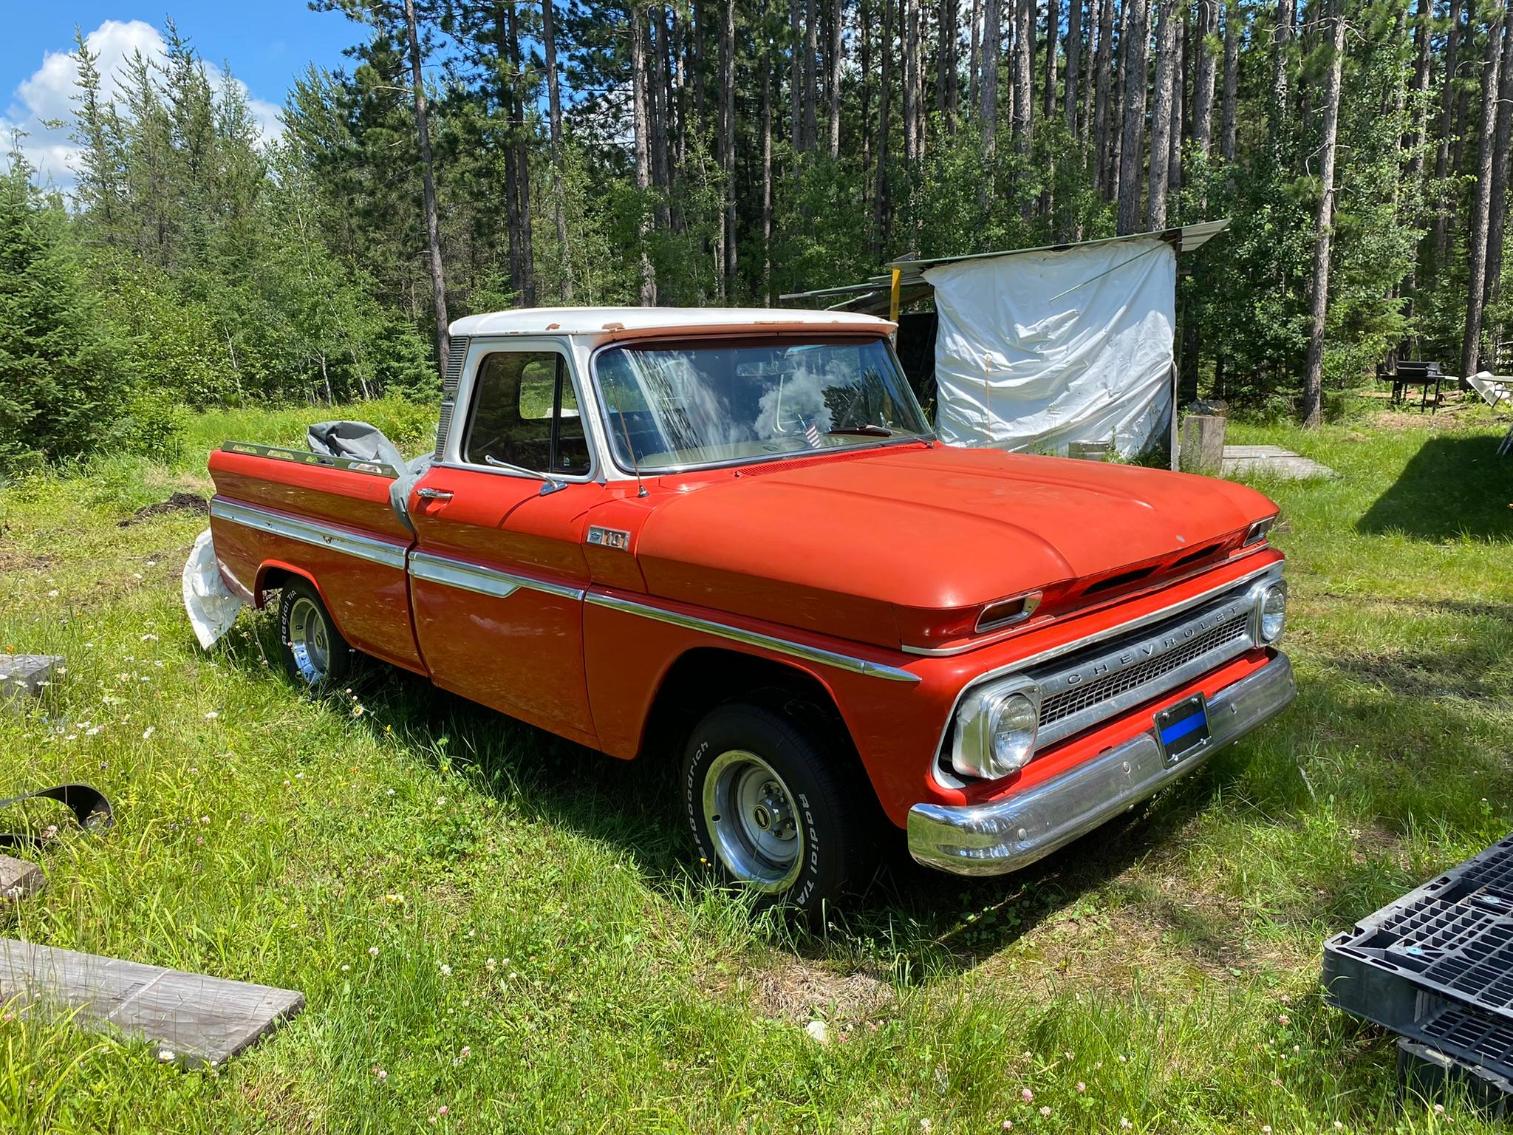 Iron Area Moving Auction: Cars, Campers, Tractor, Implements